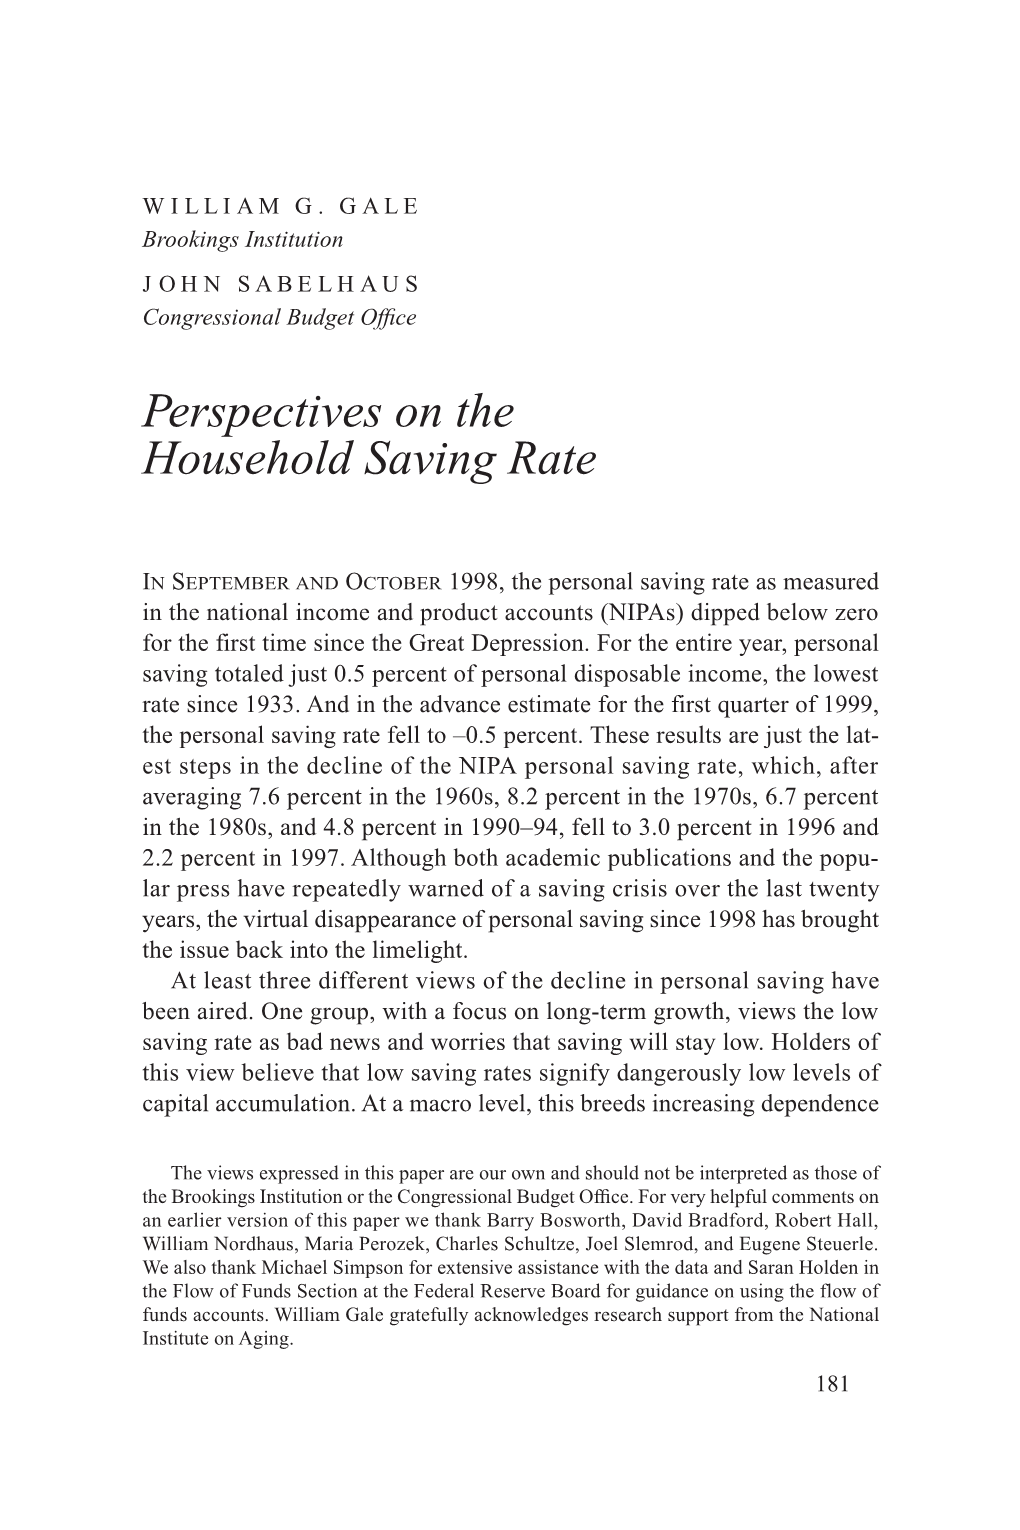 Perspectives on the Household Saving Rate